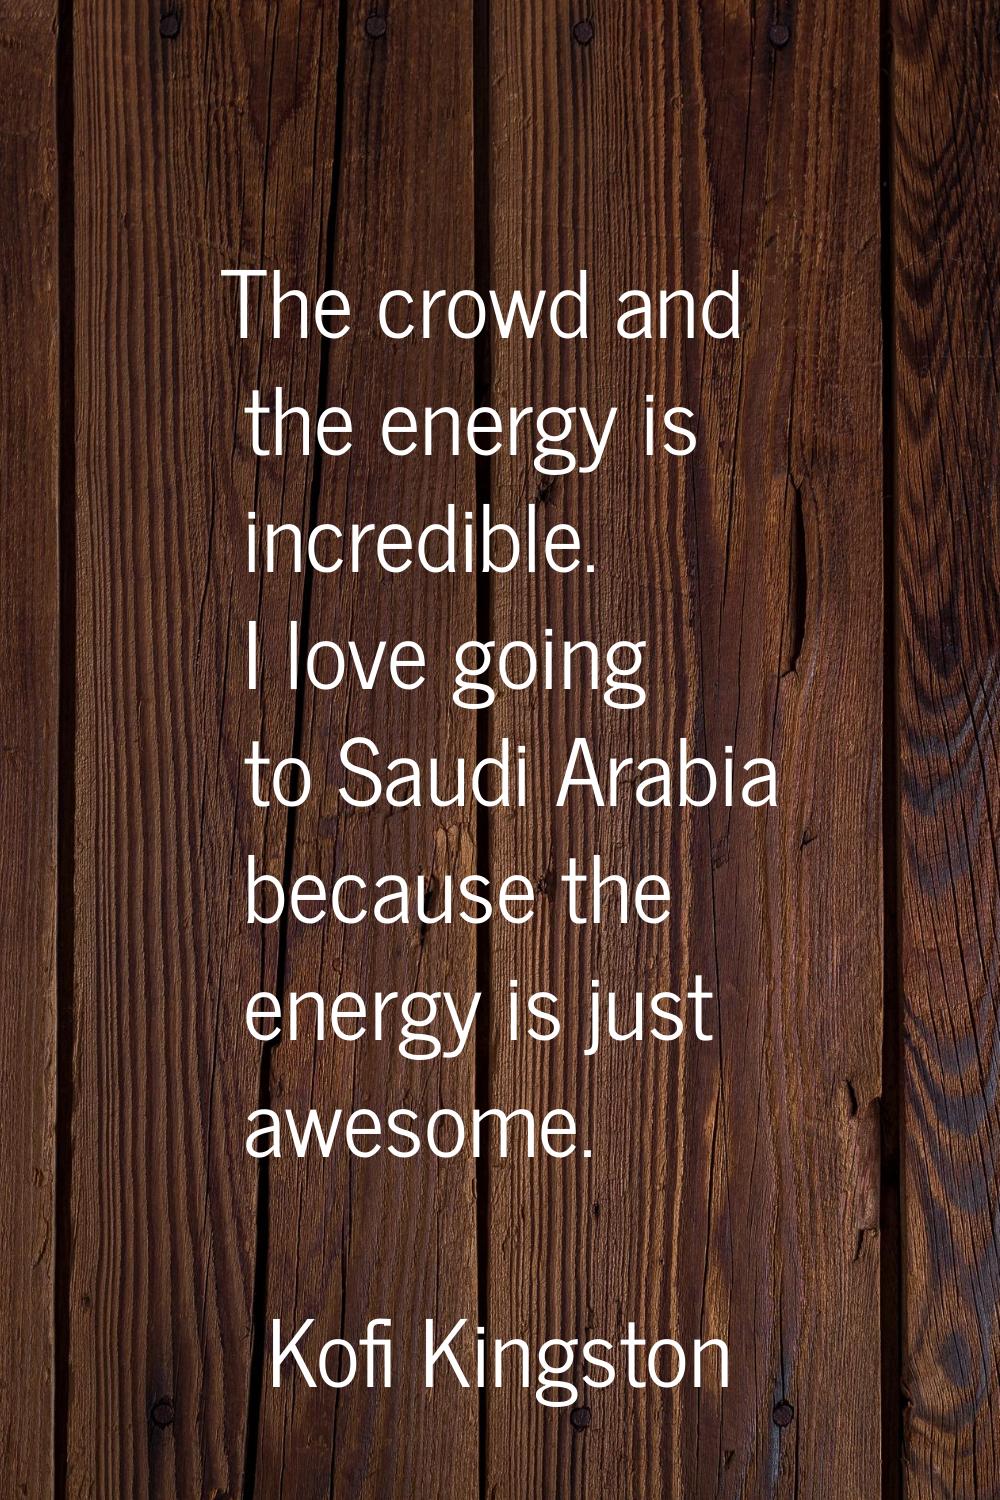 The crowd and the energy is incredible. I love going to Saudi Arabia because the energy is just awe